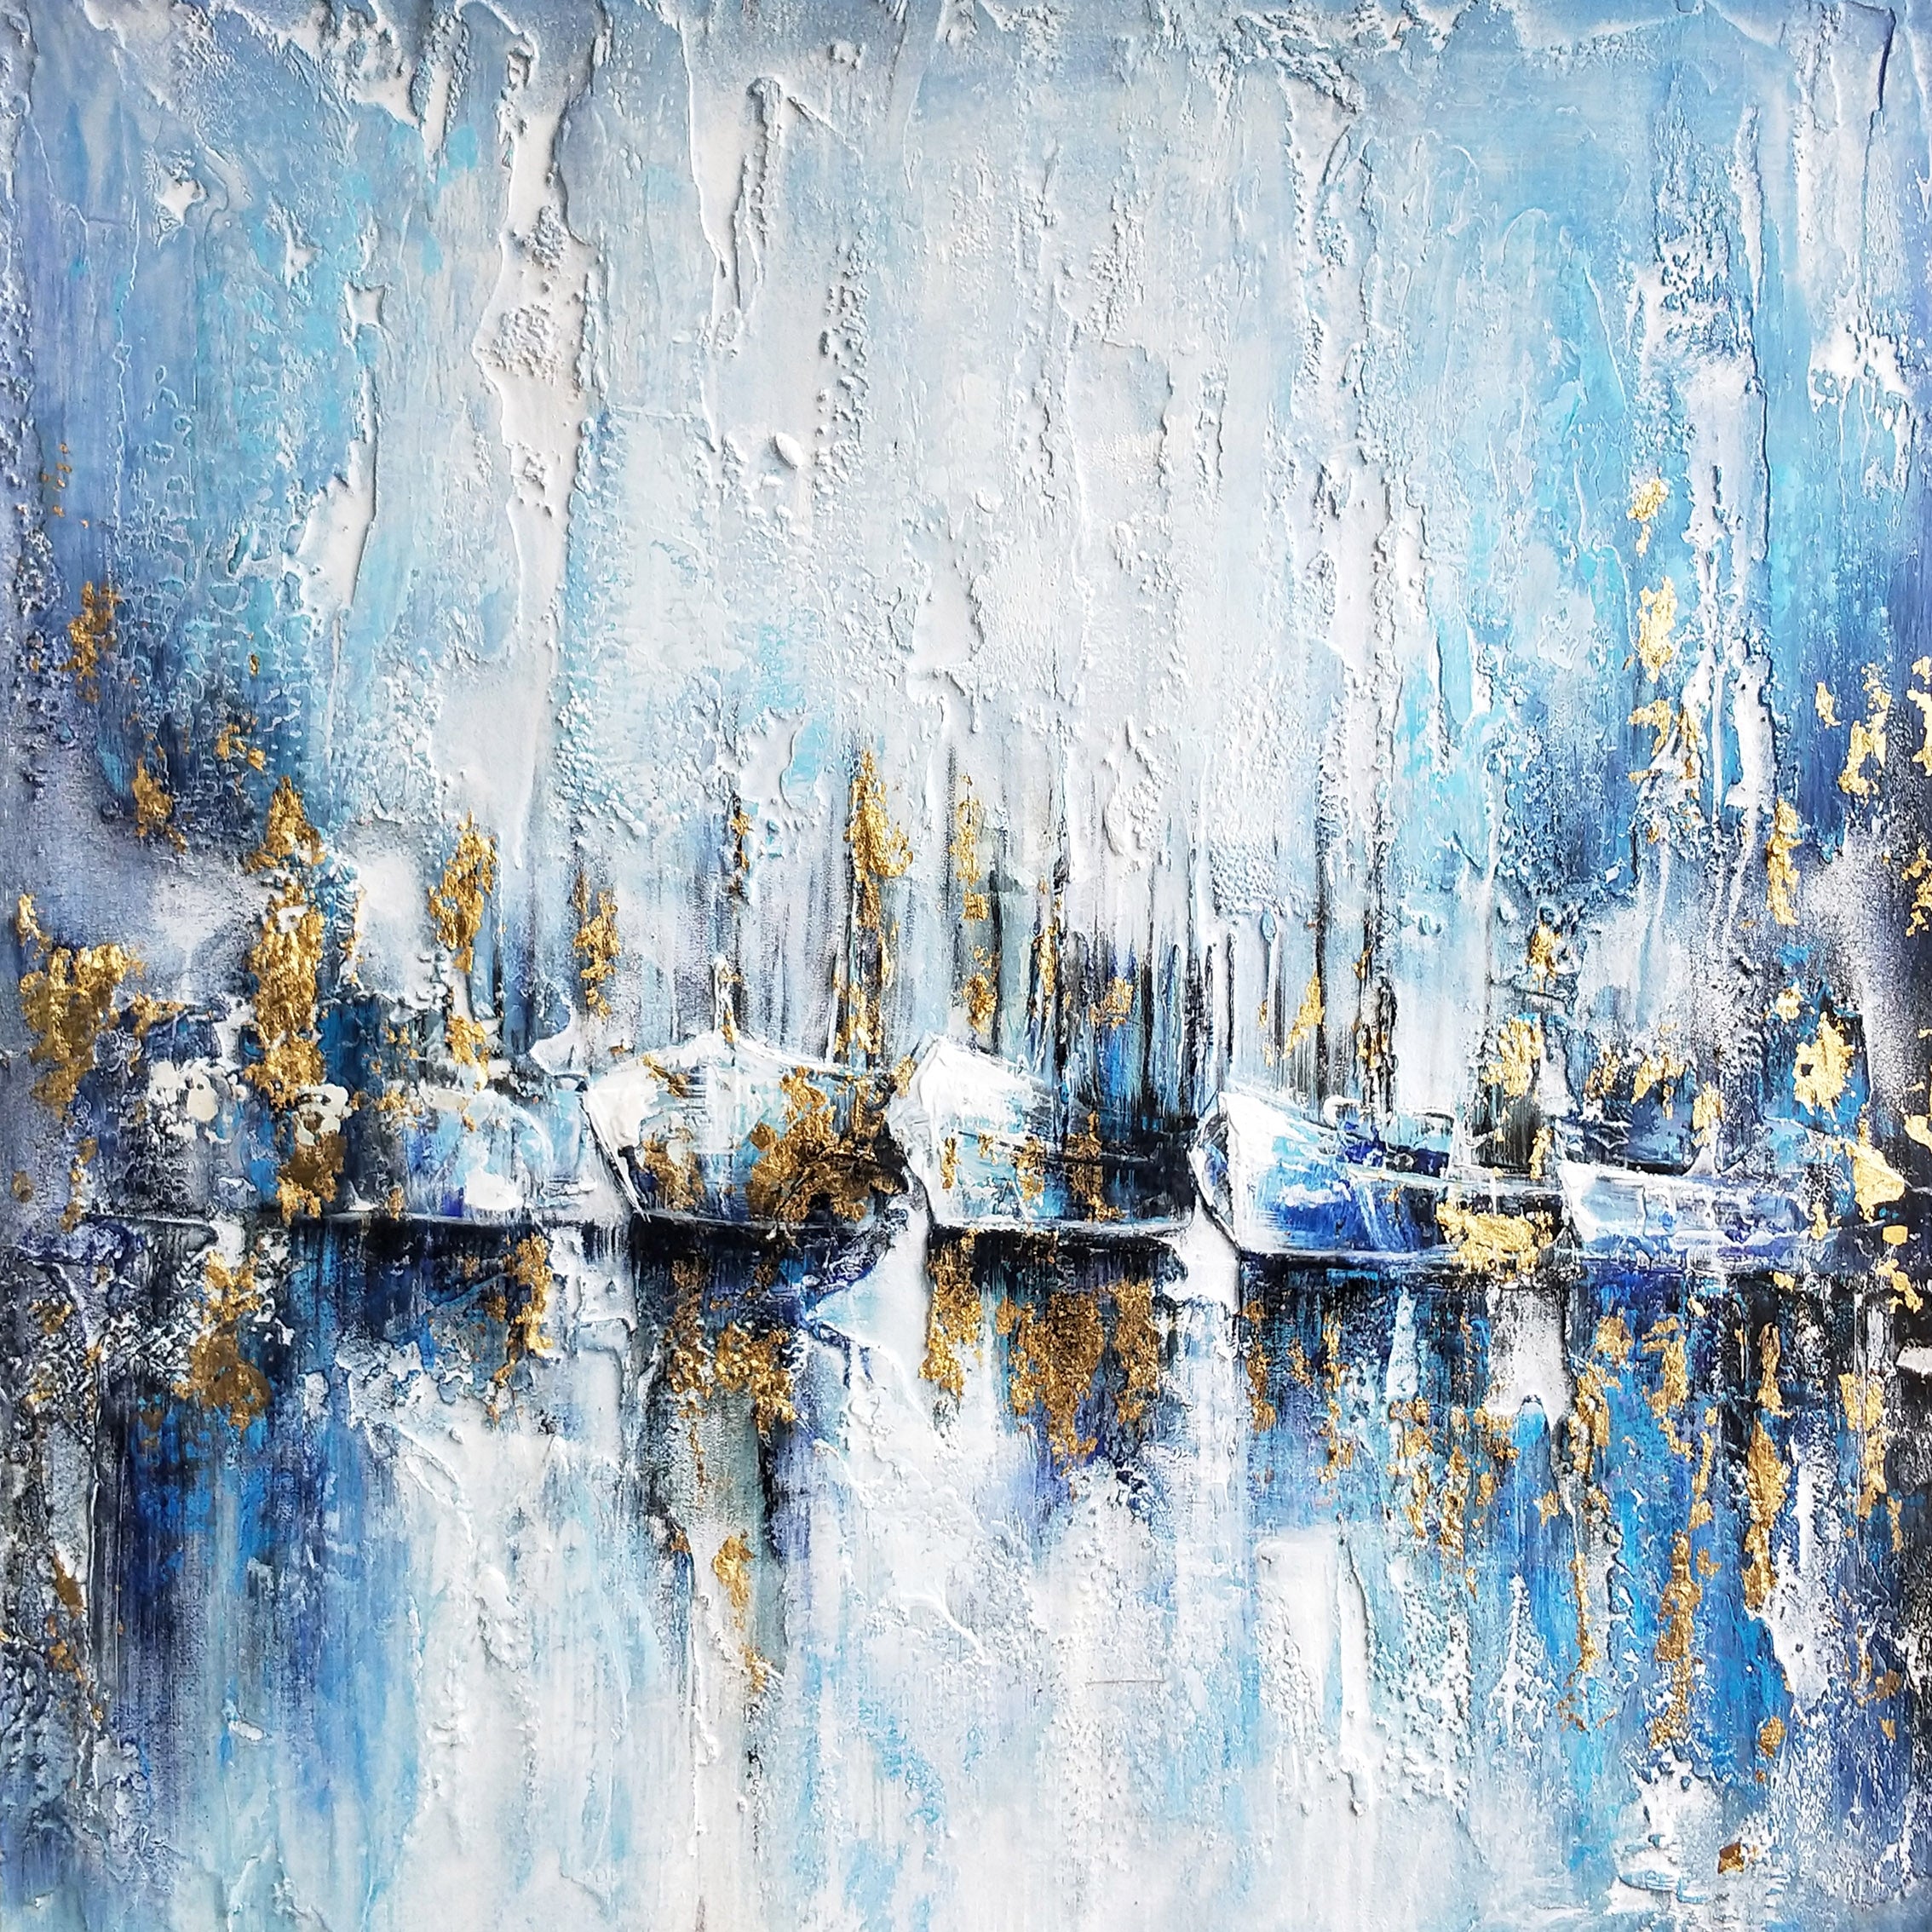 Oil painting | 100x100 cm | Painting | p0187